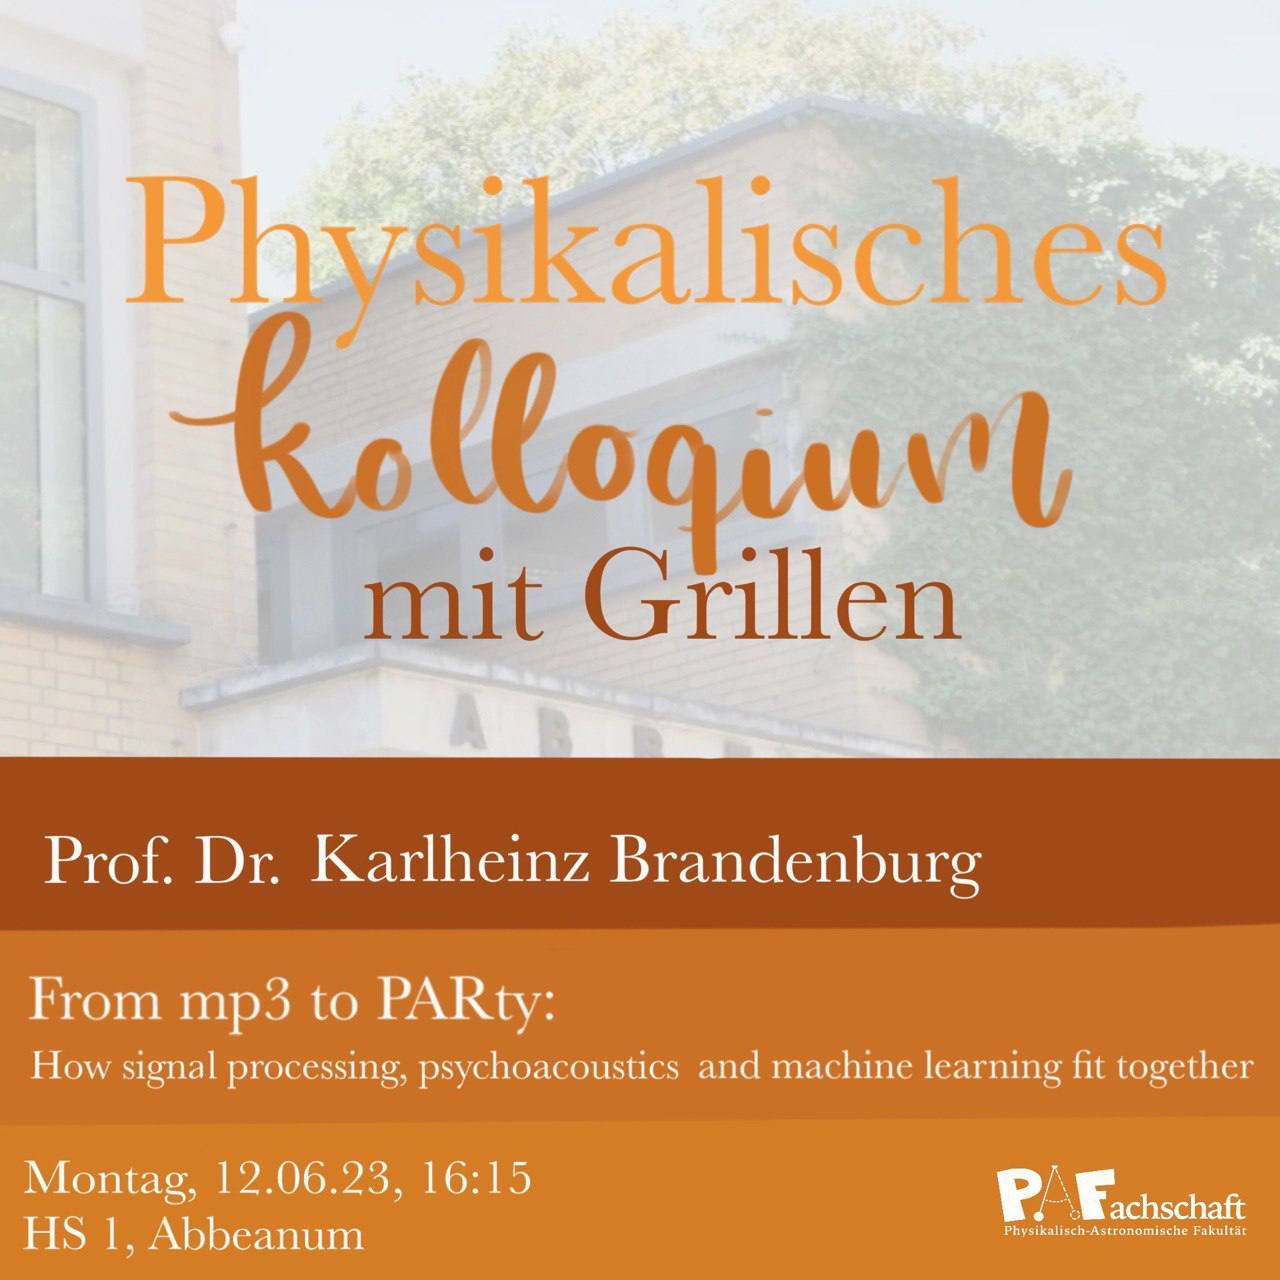 You are currently viewing Physikalisches Kolloquium mit Grillen